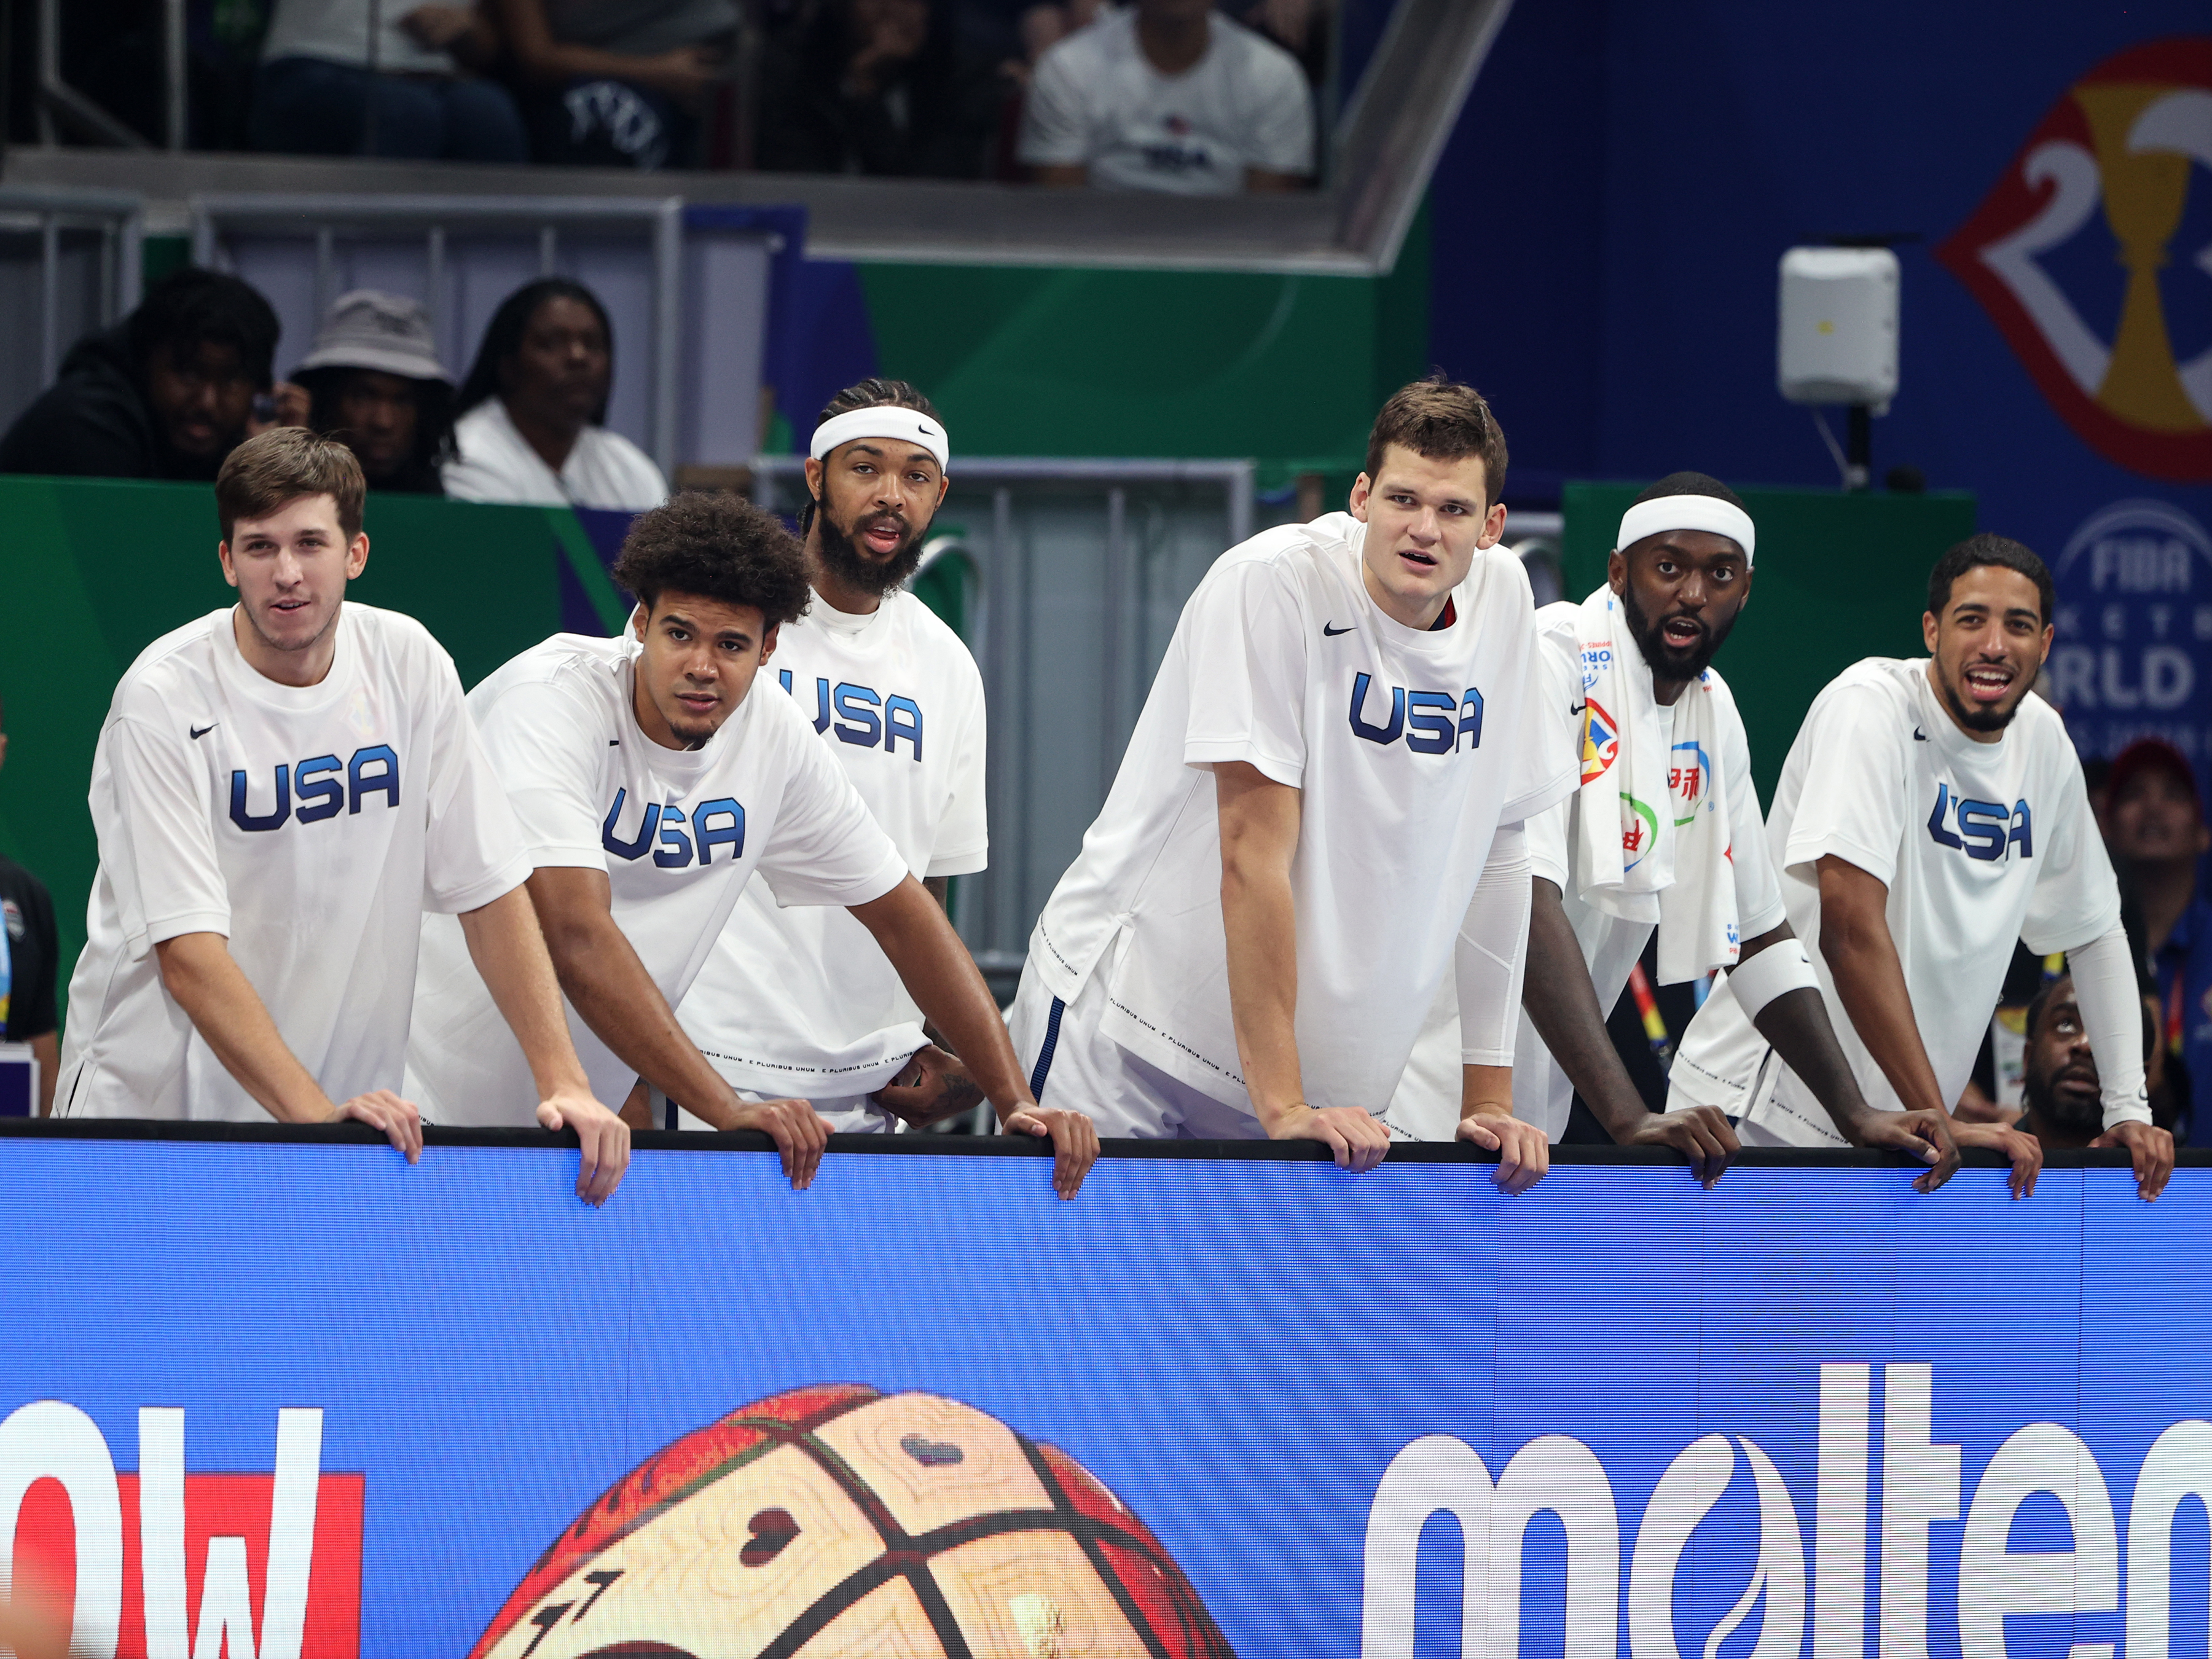 The USA Men’s Senior National Team cheer from the bench during the game against Jordan as part of the 2023 FIBA World Cup on August 30, 2023 at Mall of Asia Arena in Manila, Philippines.